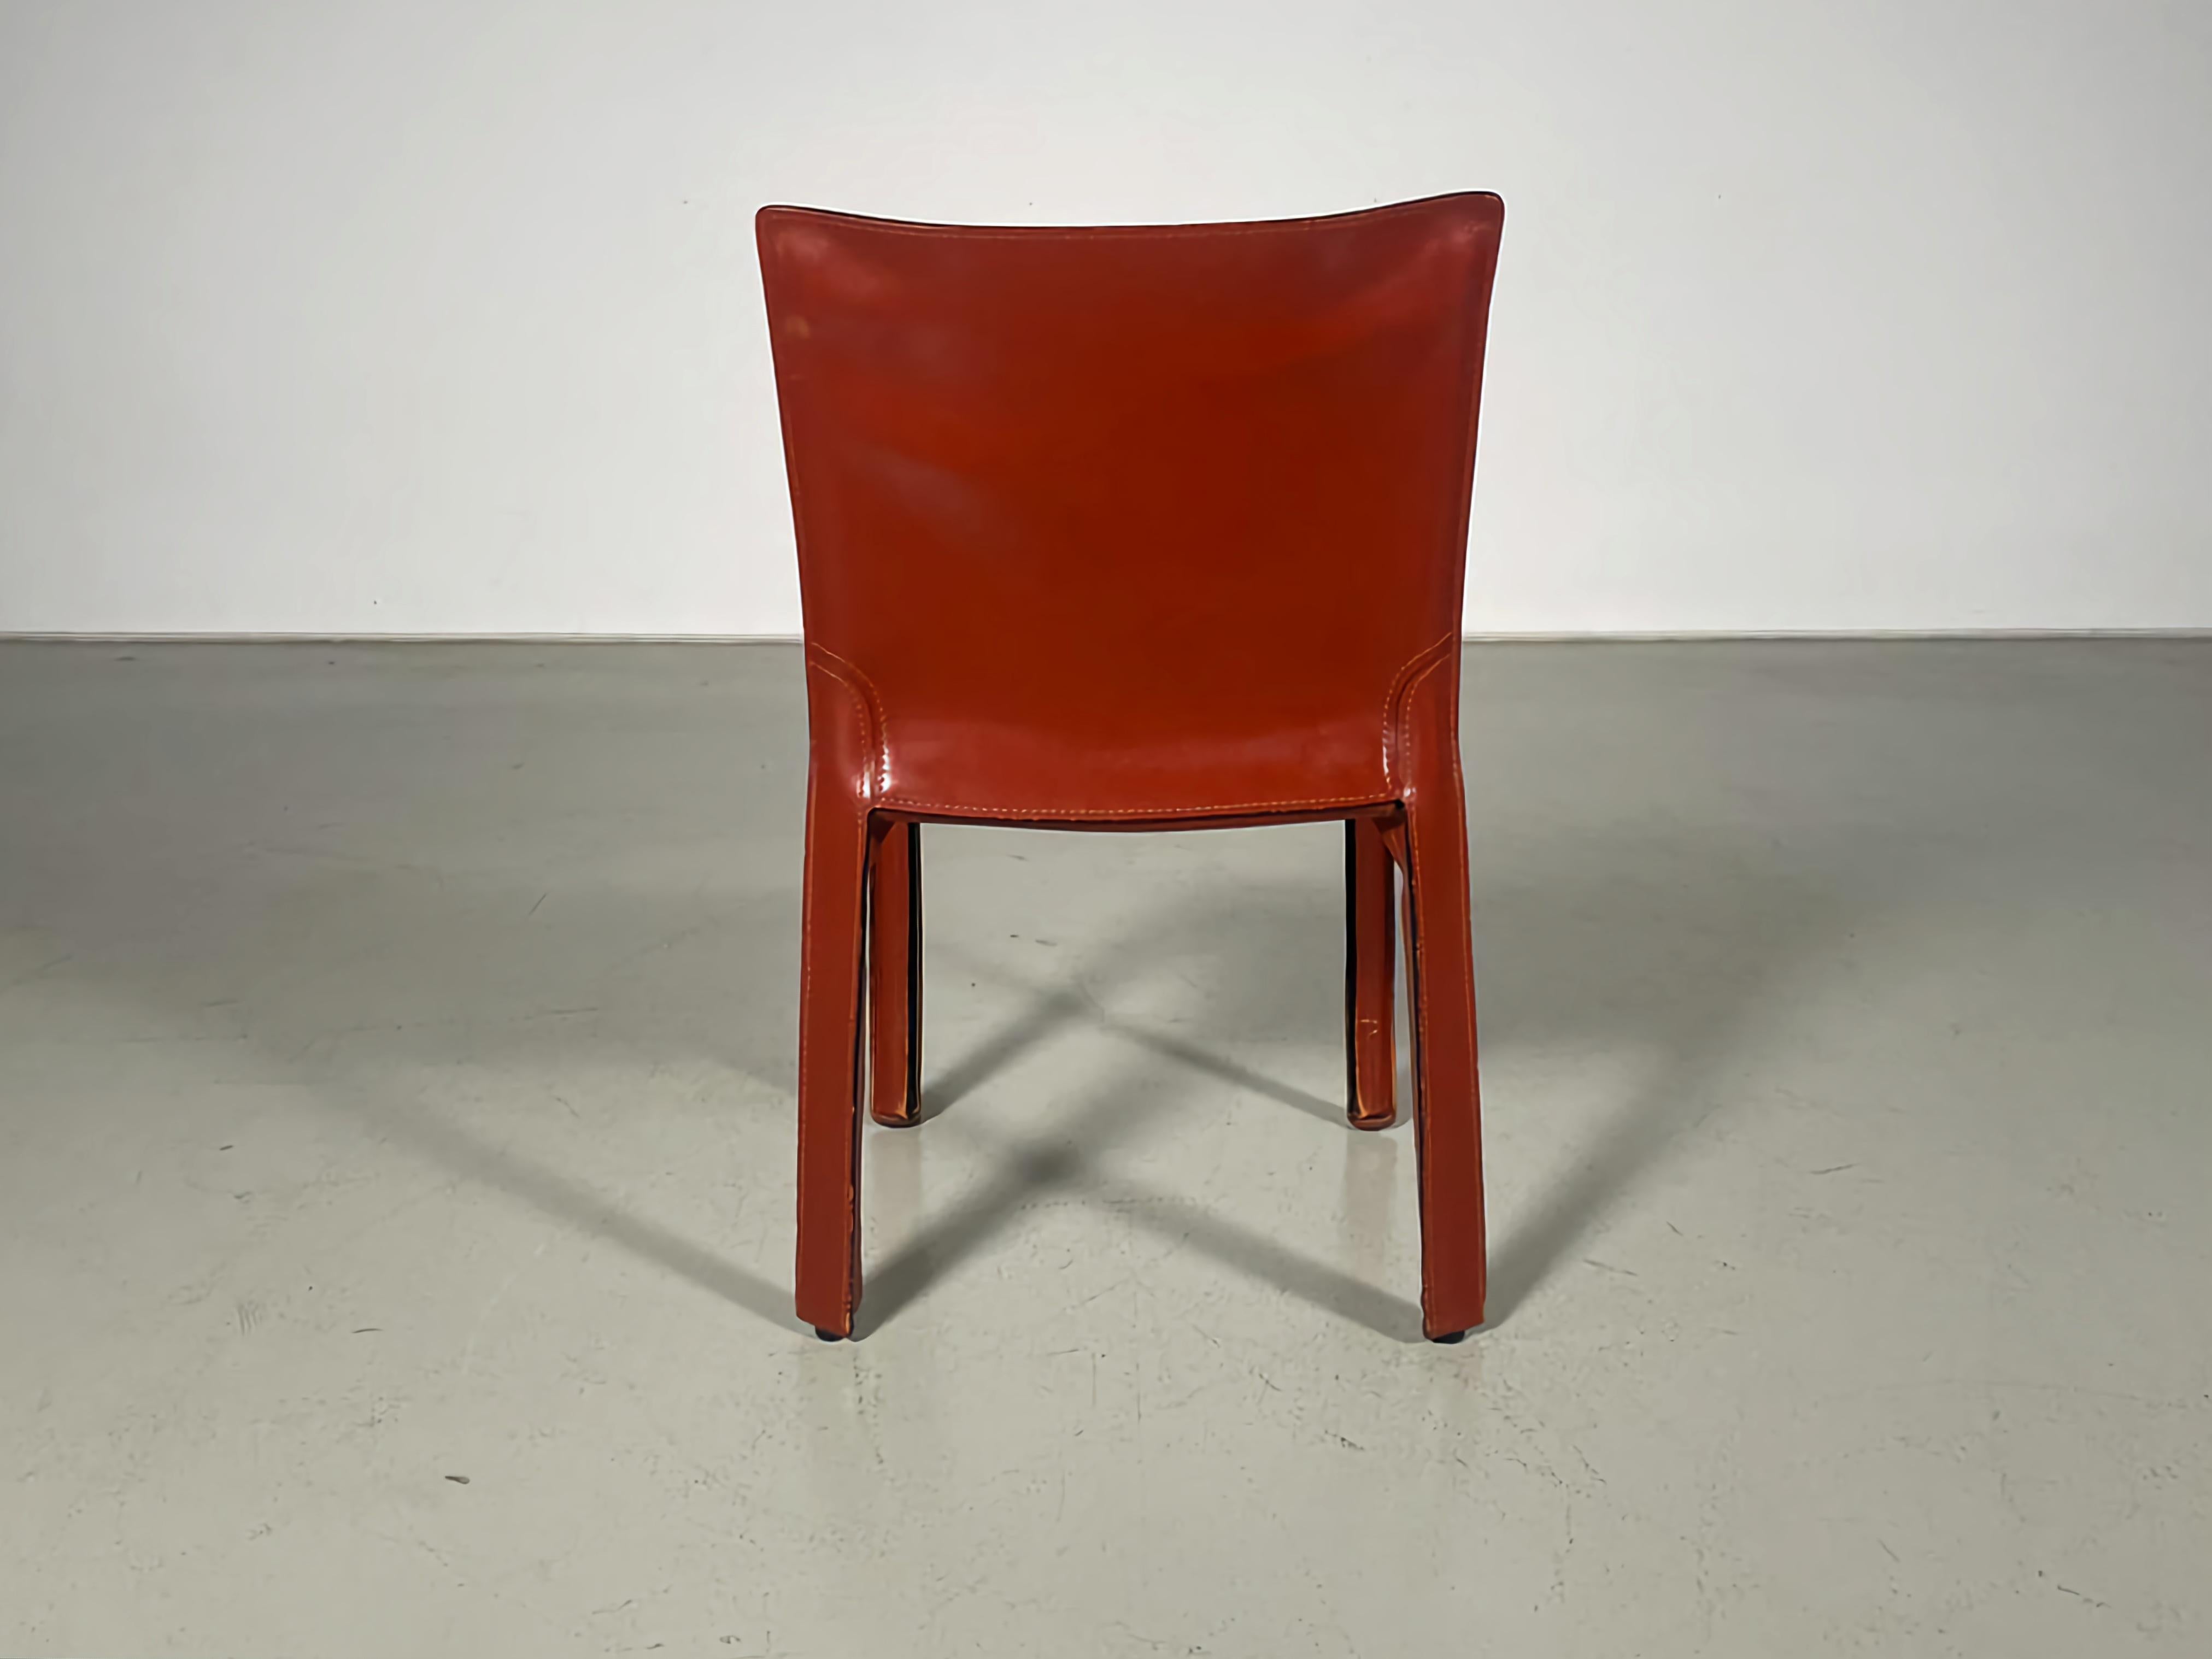 Set of 5 CAB 412 Chairs in Russian Red leather by Mario Bellini for Cassina 1